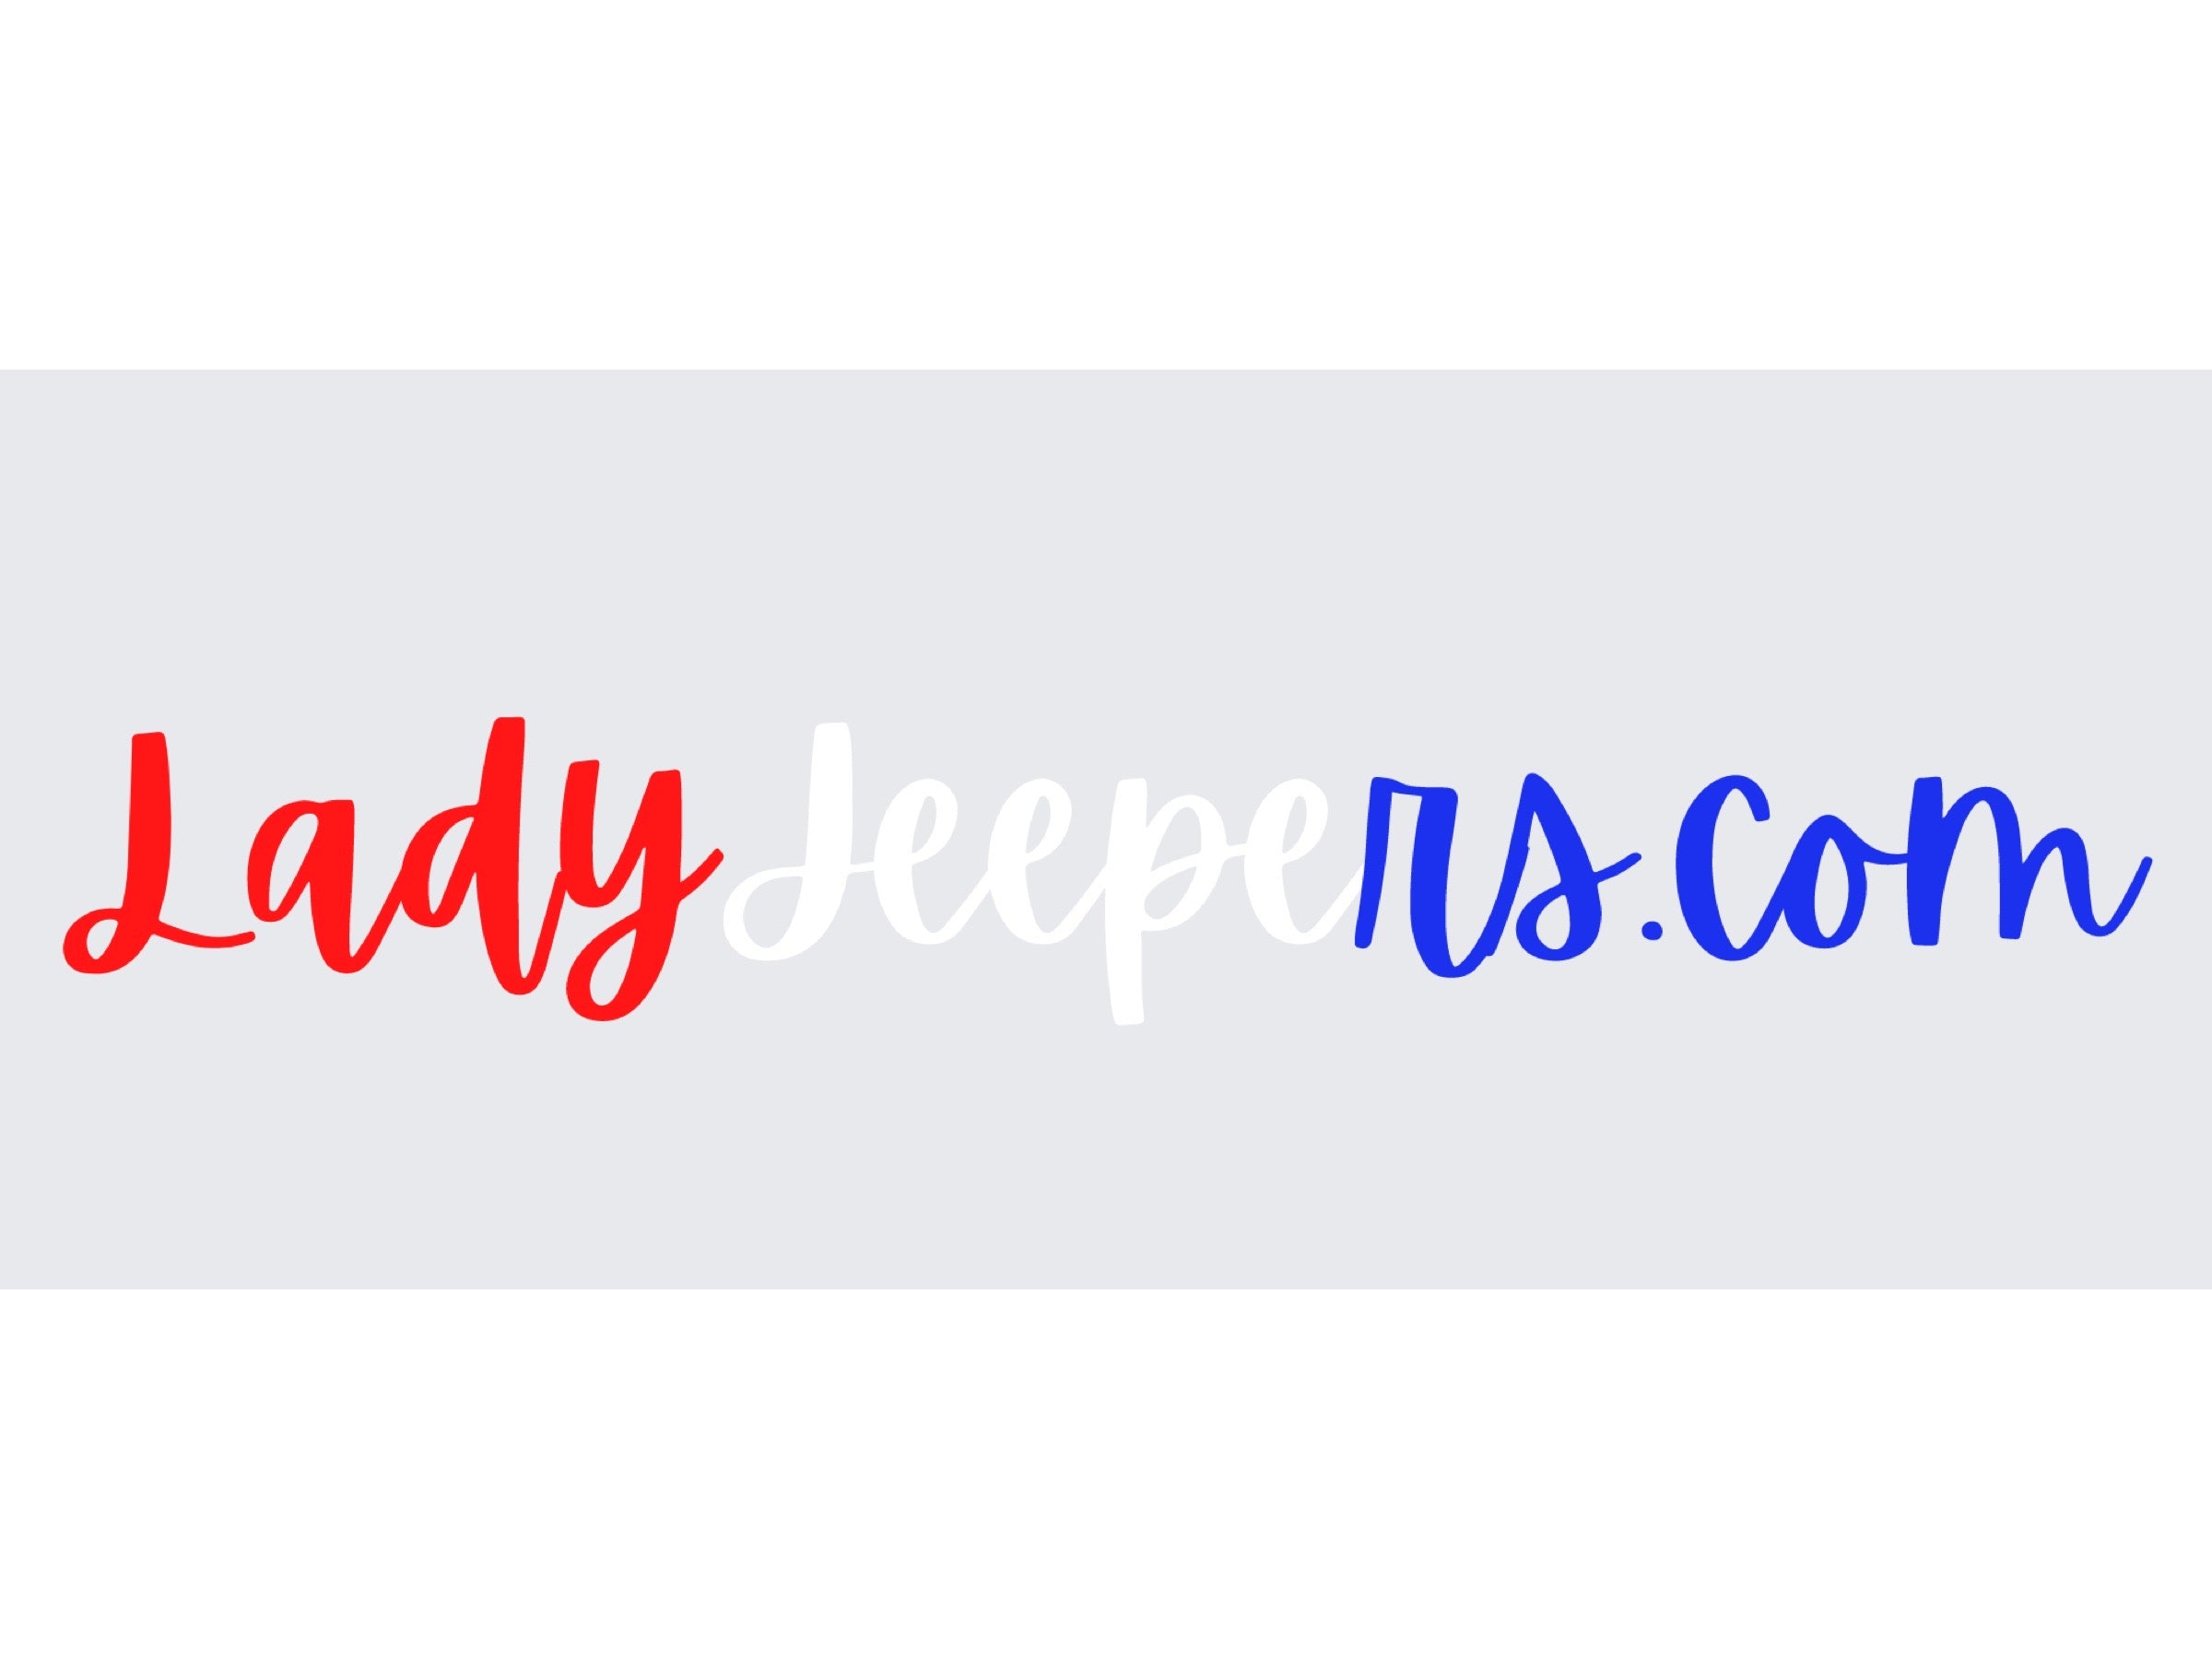 Red, white & blue long LadyJeepers.com decal!